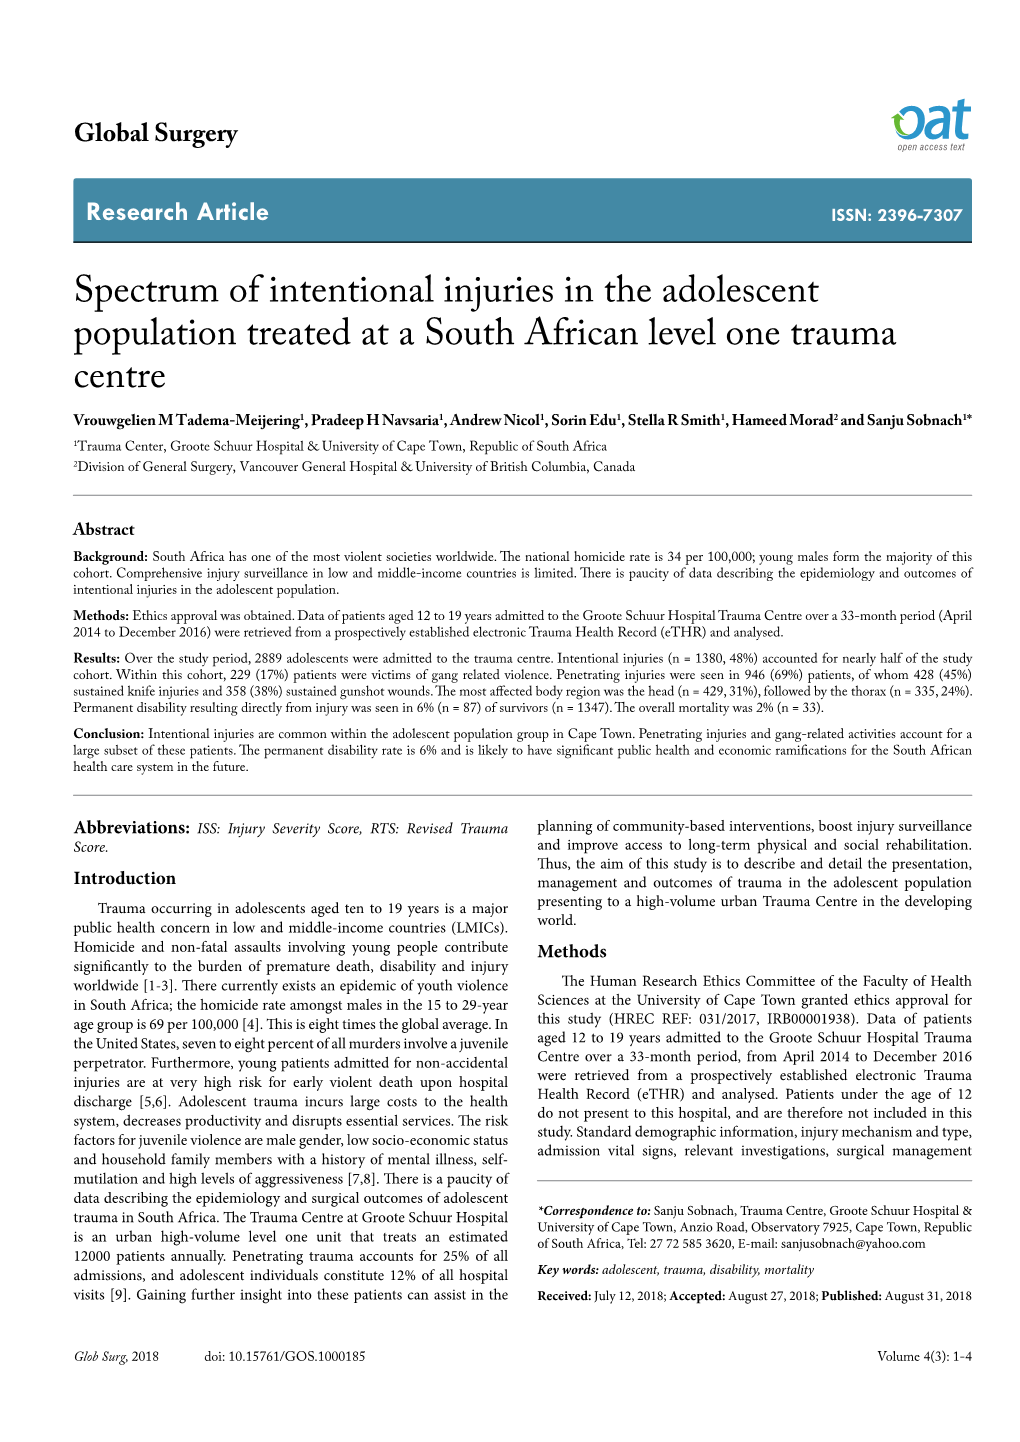 Spectrum of Intentional Injuries in the Adolescent Population Treated at A